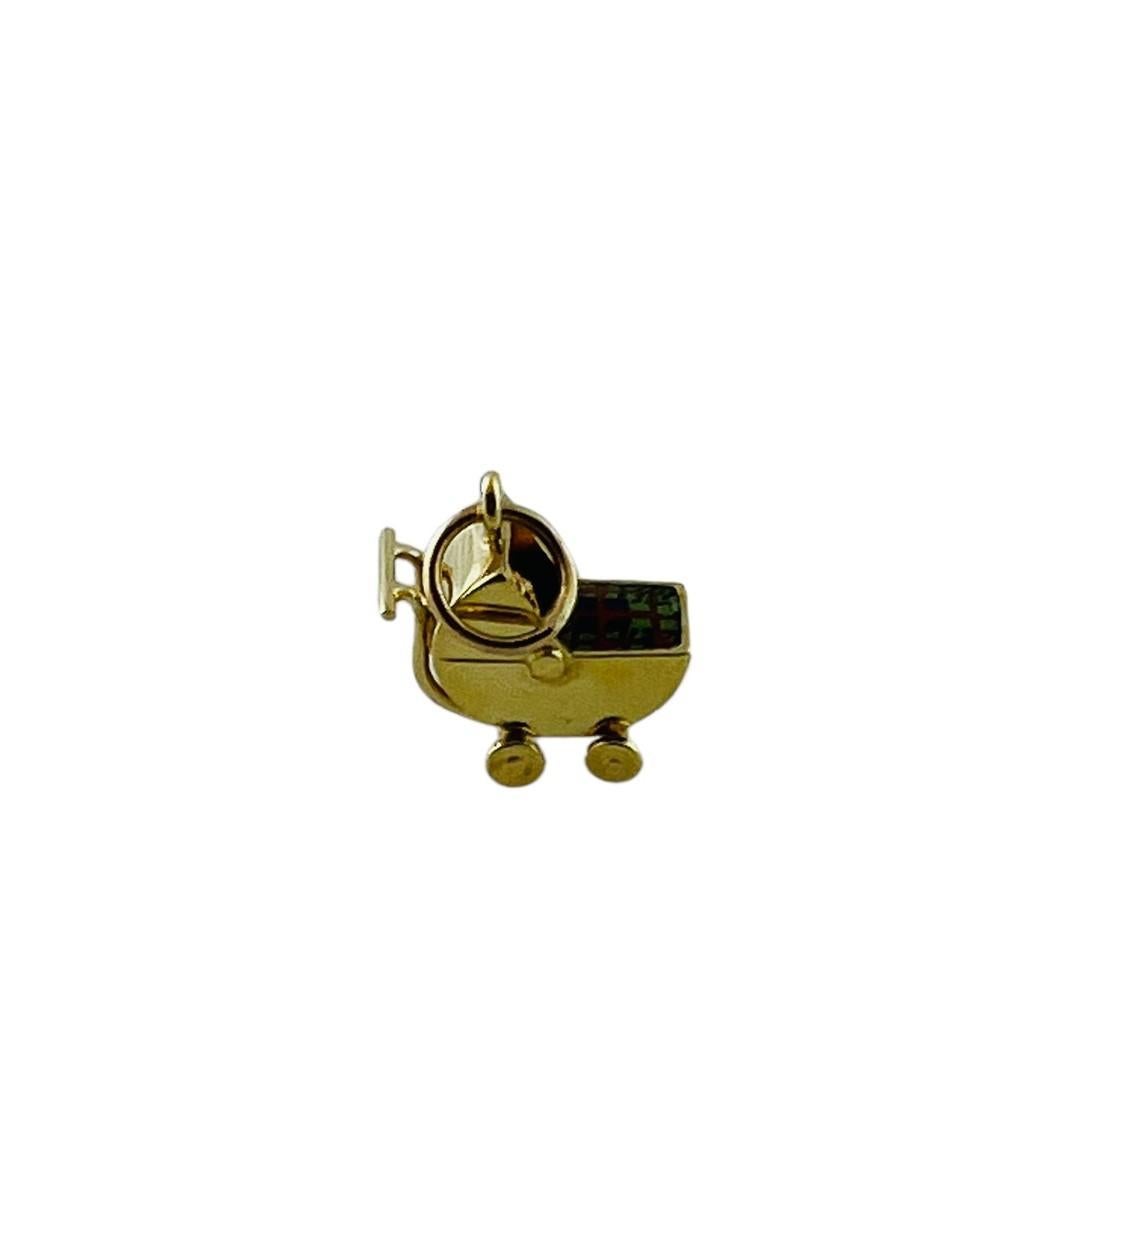 14K Yellow Gold Enamel Baby Carriage Charm With Baby #15612 1